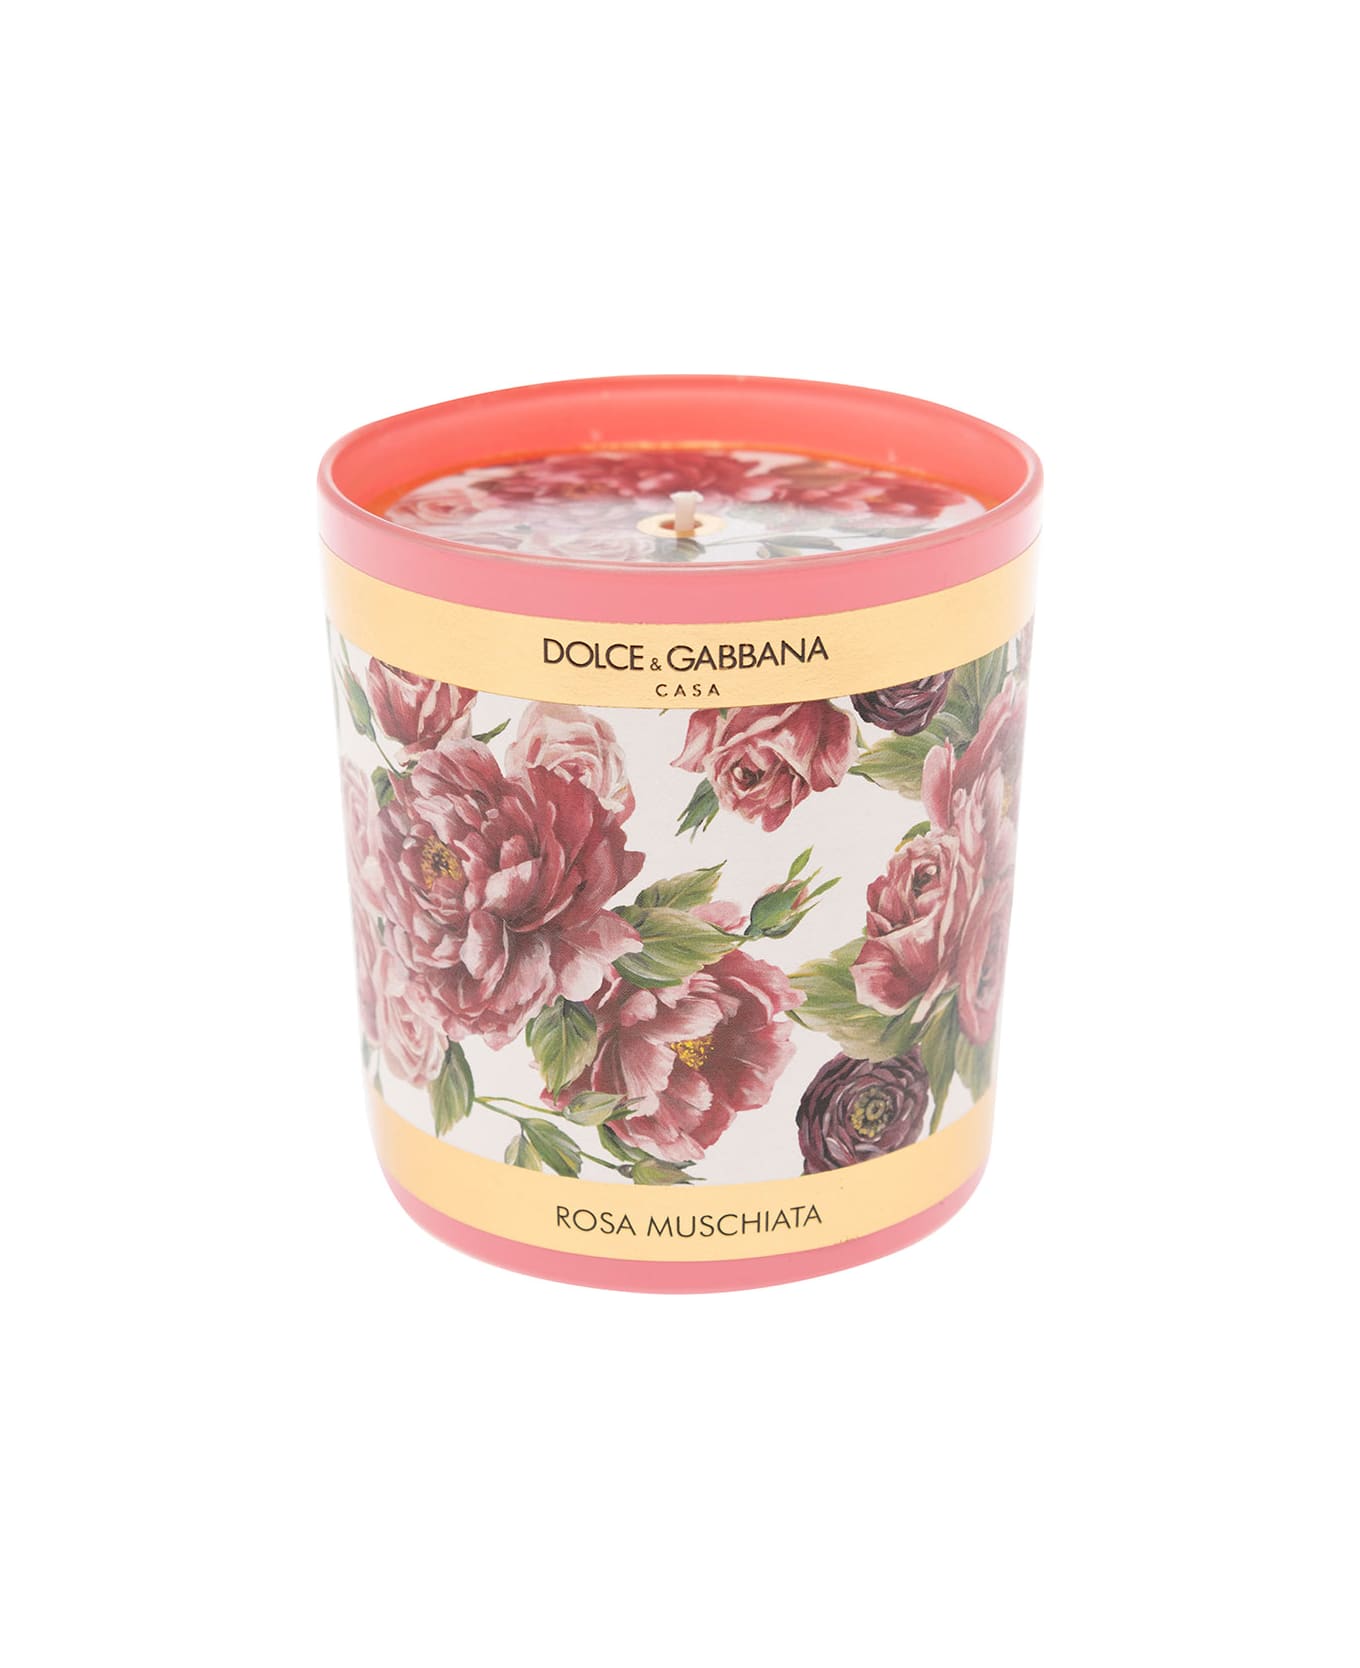 Dolce & Gabbana Musk Rose Scented Candle - Pink